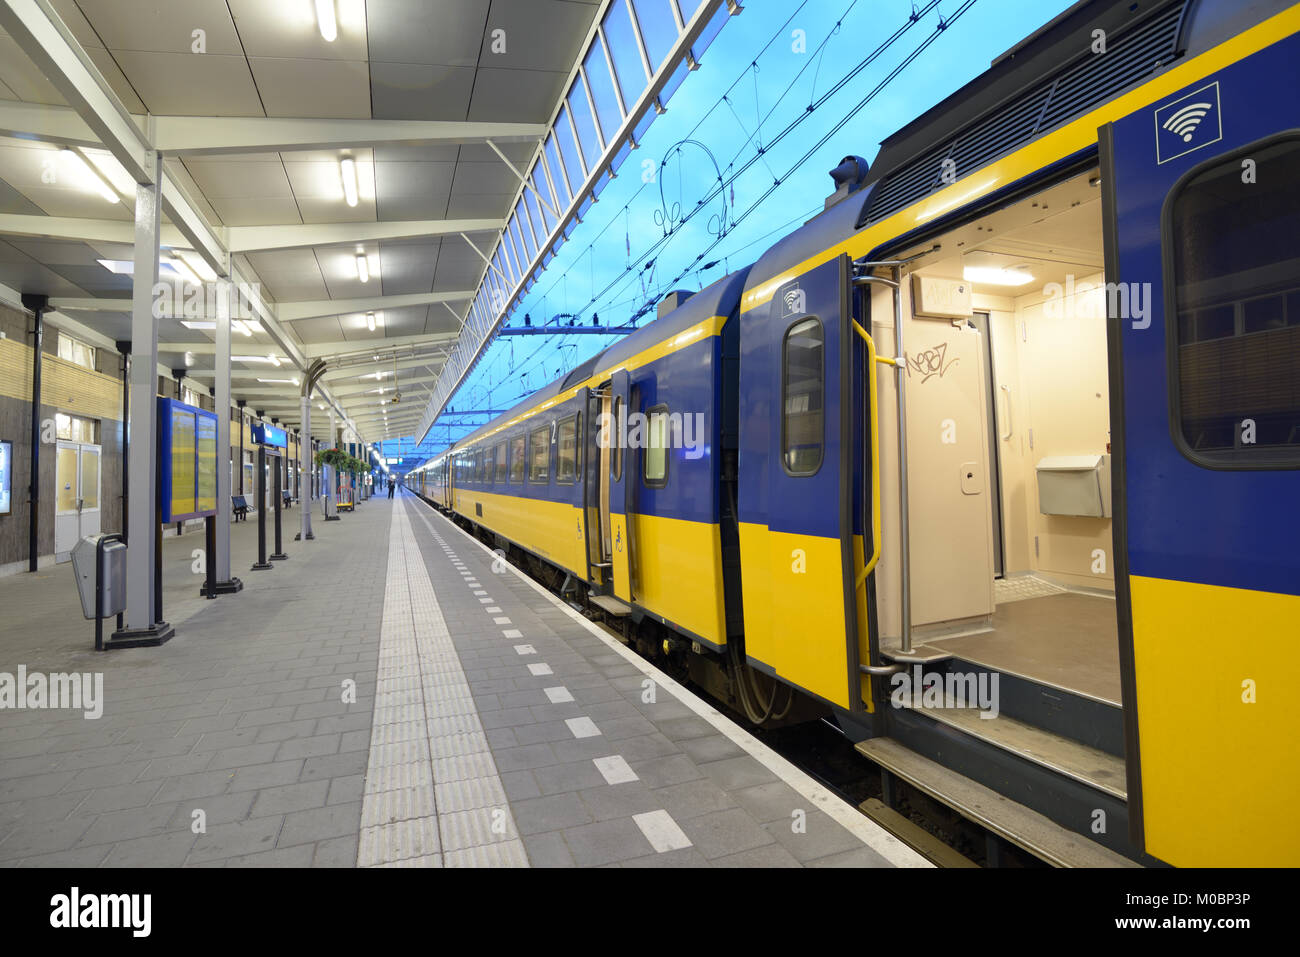 Venlo, Netherlands - June 22, 2013: Commuter train on a train station of Venlo, Netherlands on June 22, 2013. Dutch trains are on the whole punctual w Stock Photo